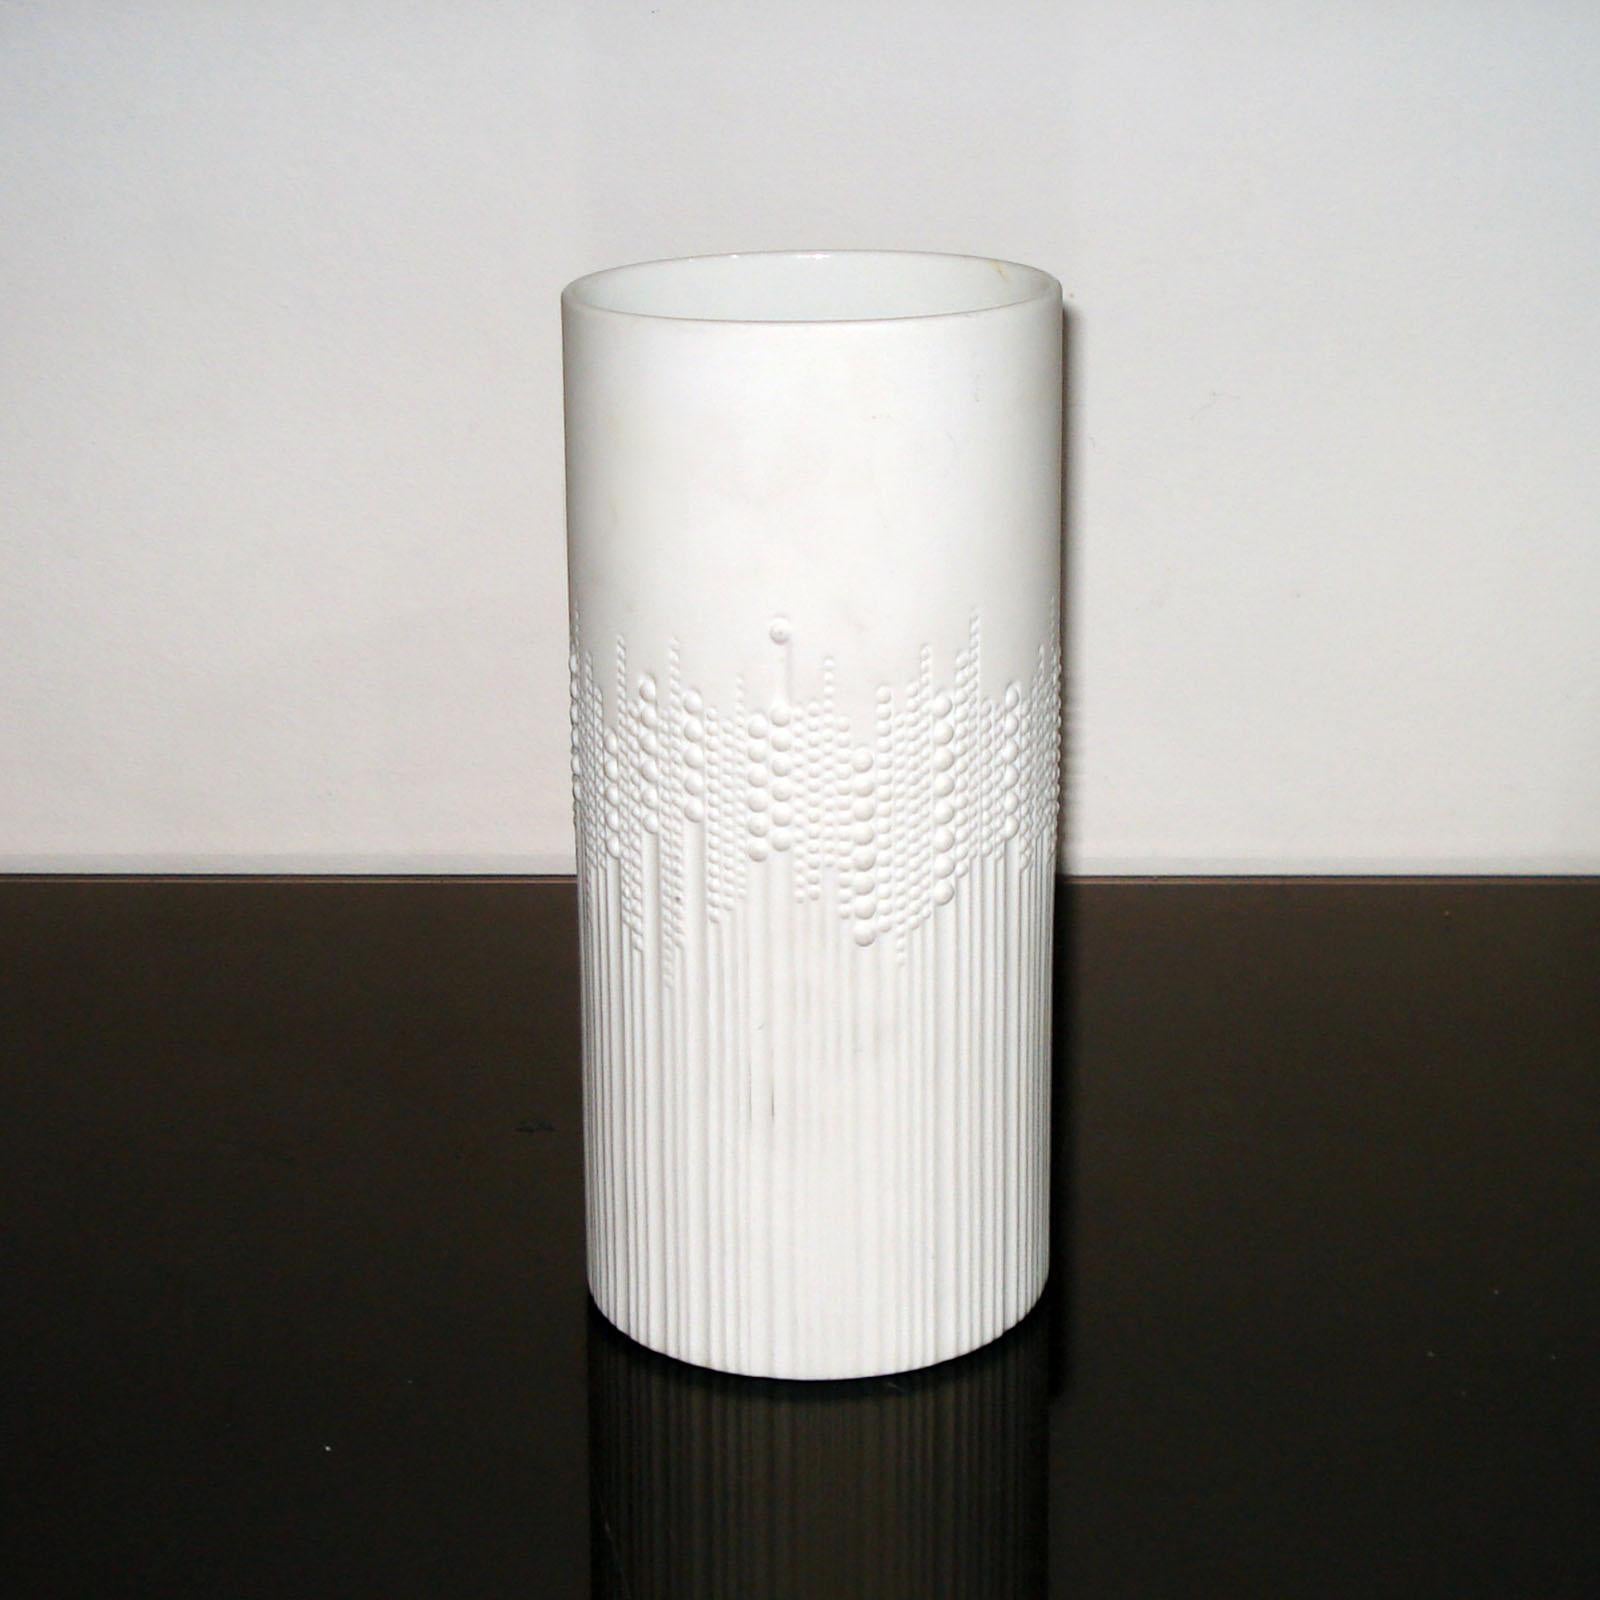 A tall, ovoid shaped white porcelain vase designed in 1970 by Tapio Wirkkala for Rosenthal Studio Line ‘Drops’ pattern as the tactile design on its exterior has raised dots, like rain droplets, against grooved channels. Matte finish exterior with a